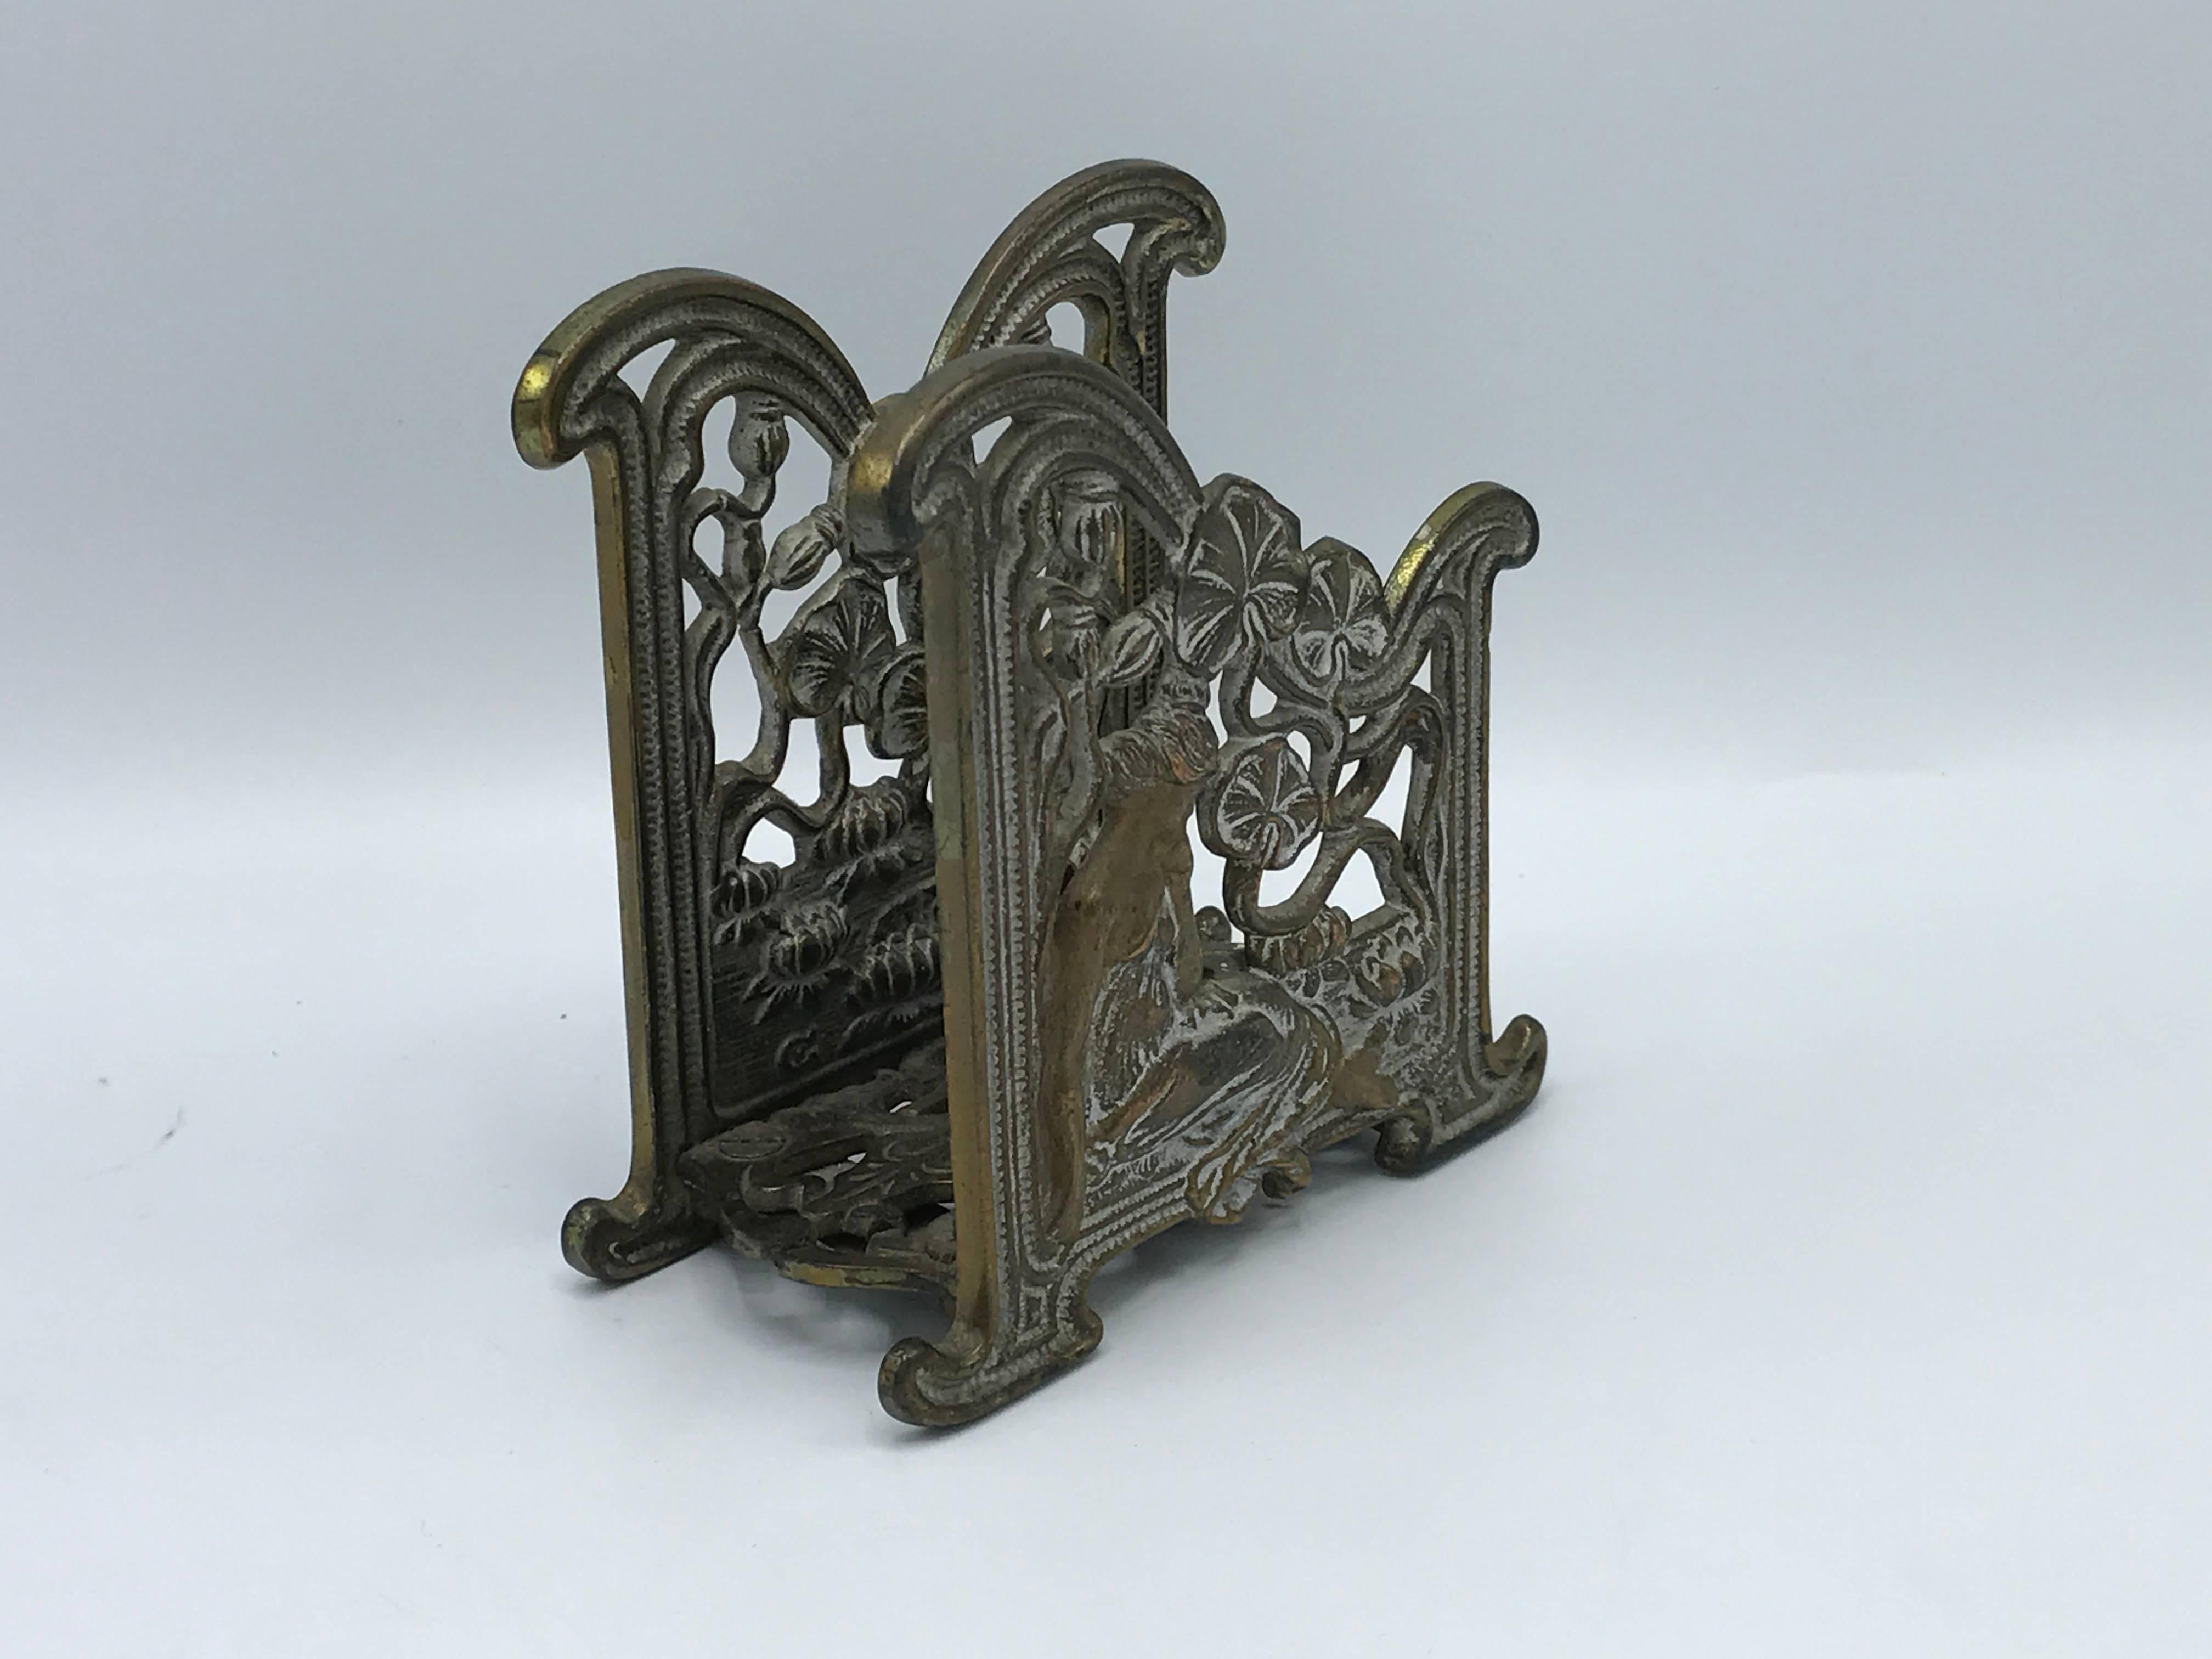 Offered is a gorgeous, 1920s Art Nouveau, bronze letter holder.